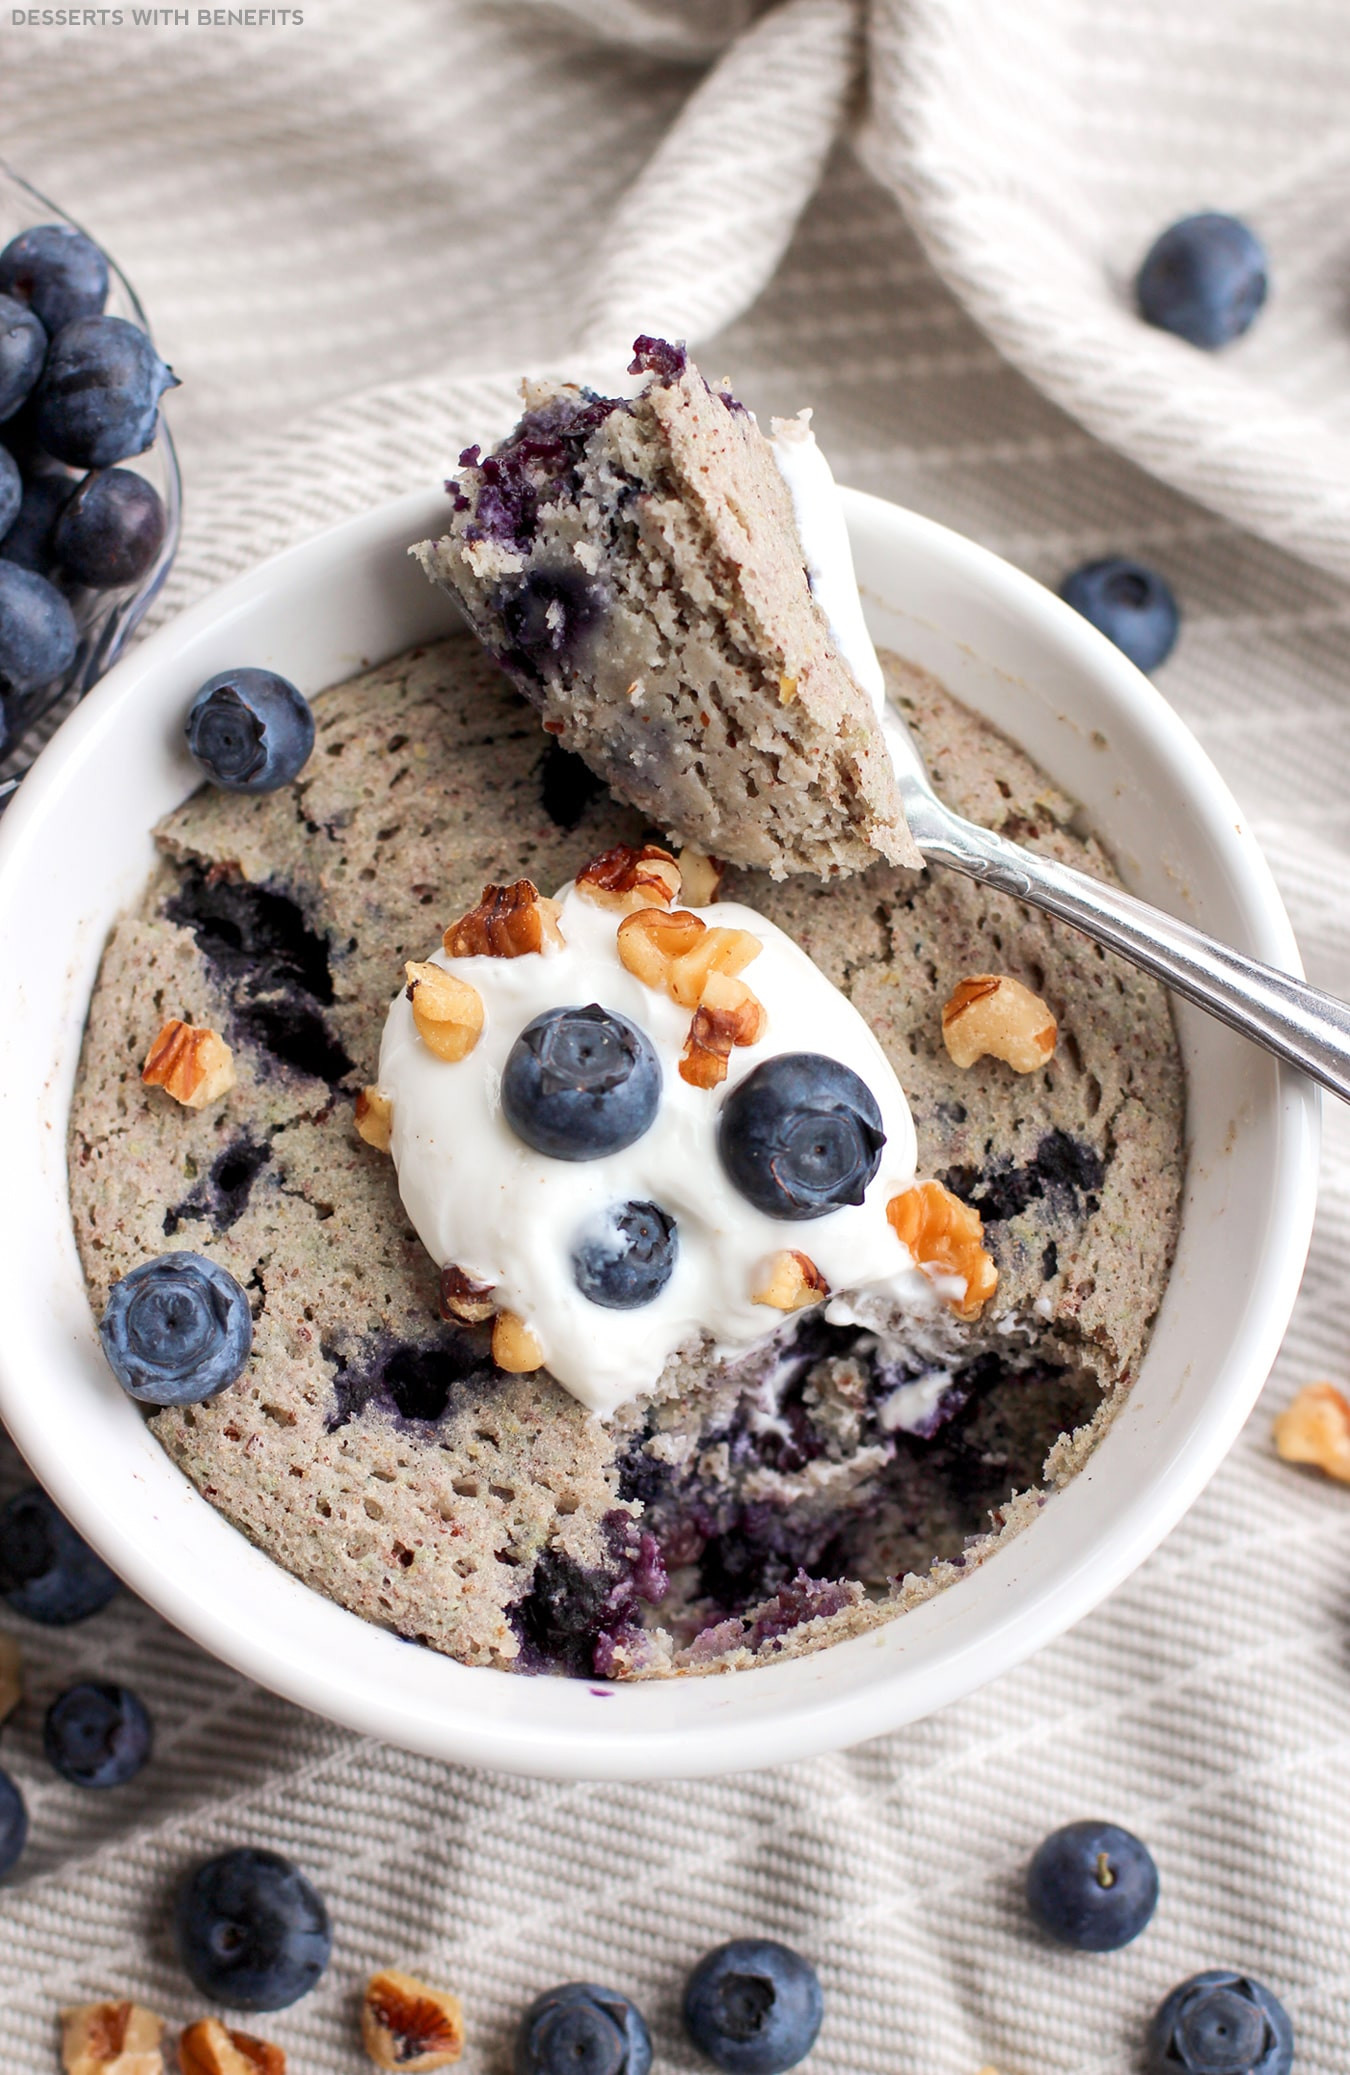 Healthy Microwave Desserts
 Healthy Single Serving Blueberry Microwave Muffin